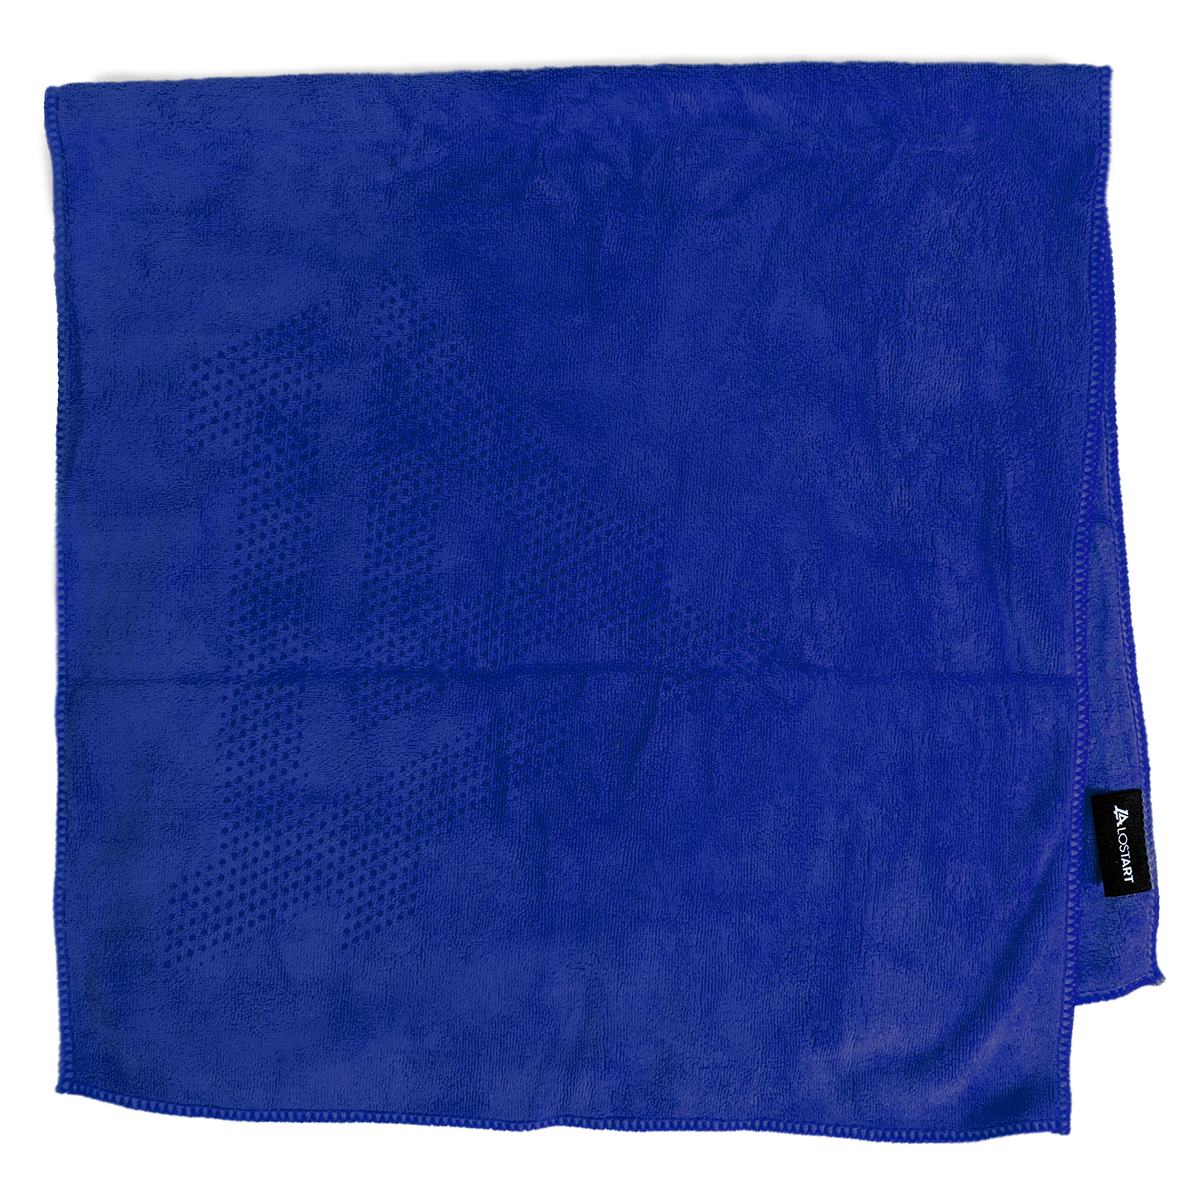 Lost Art Canada - blue rink rag hand towel top view